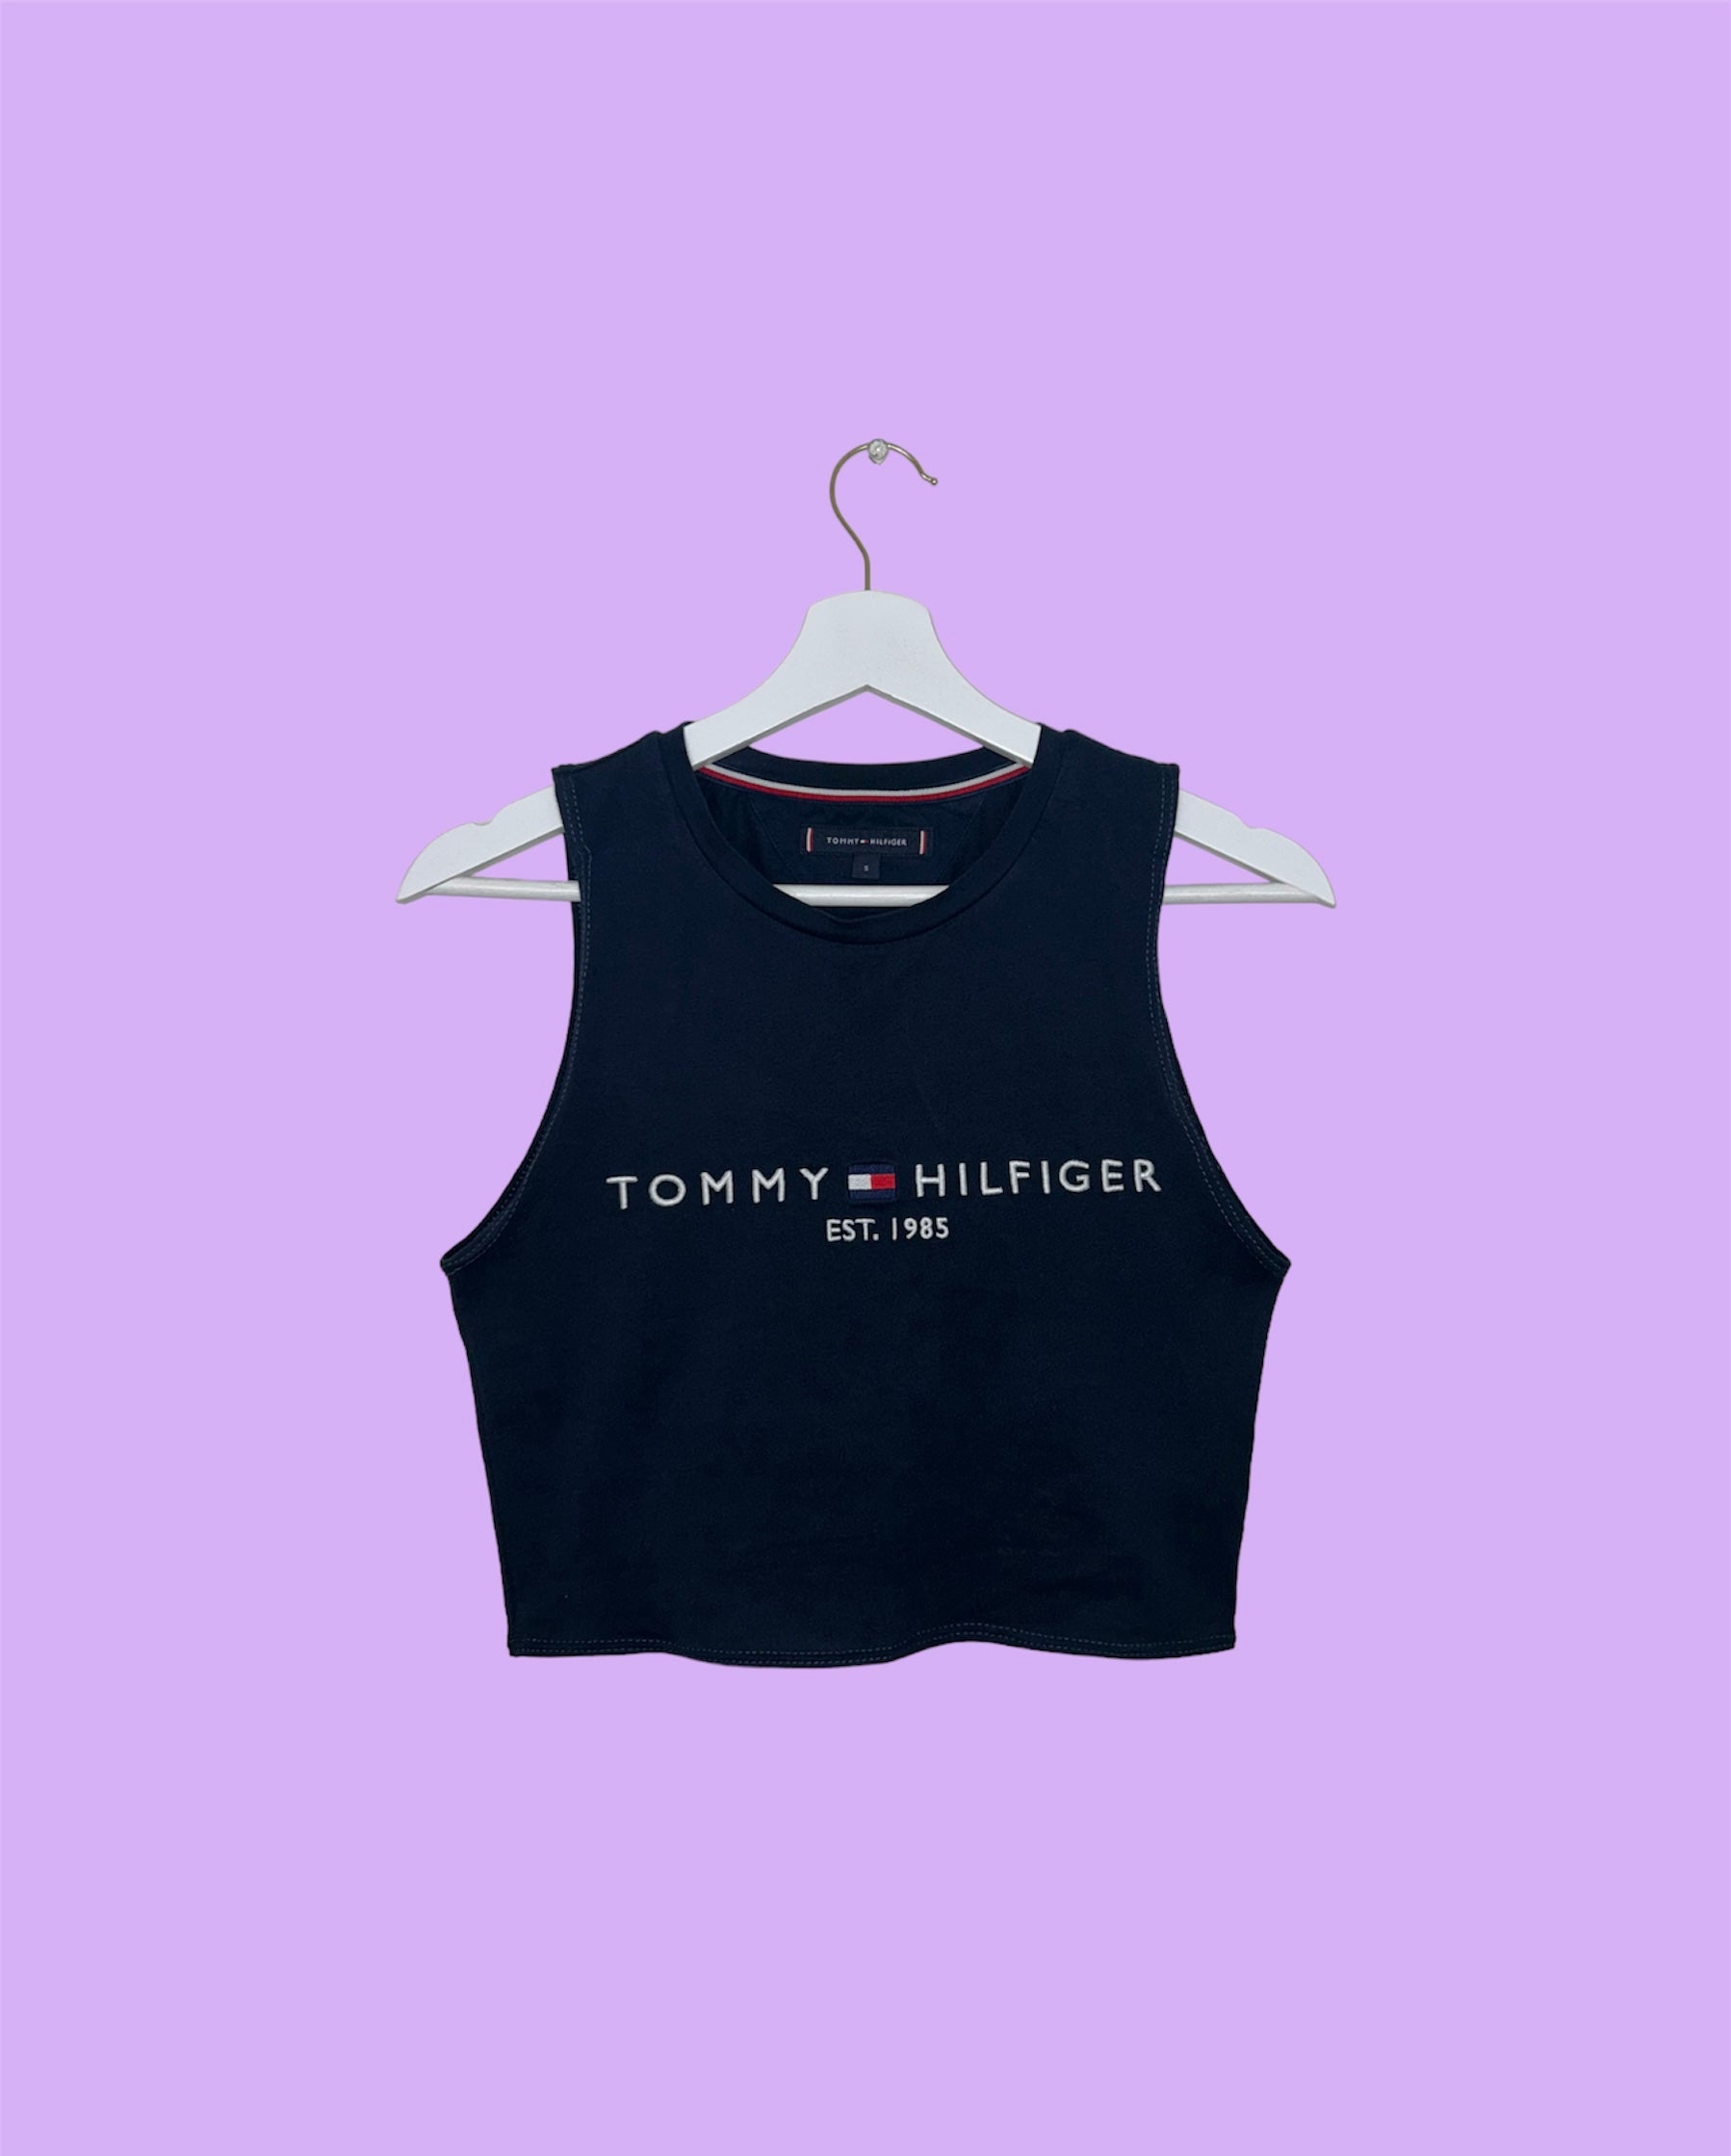 navy sleeveless crop top with white tommy hilfiger logo shown on a lilac background